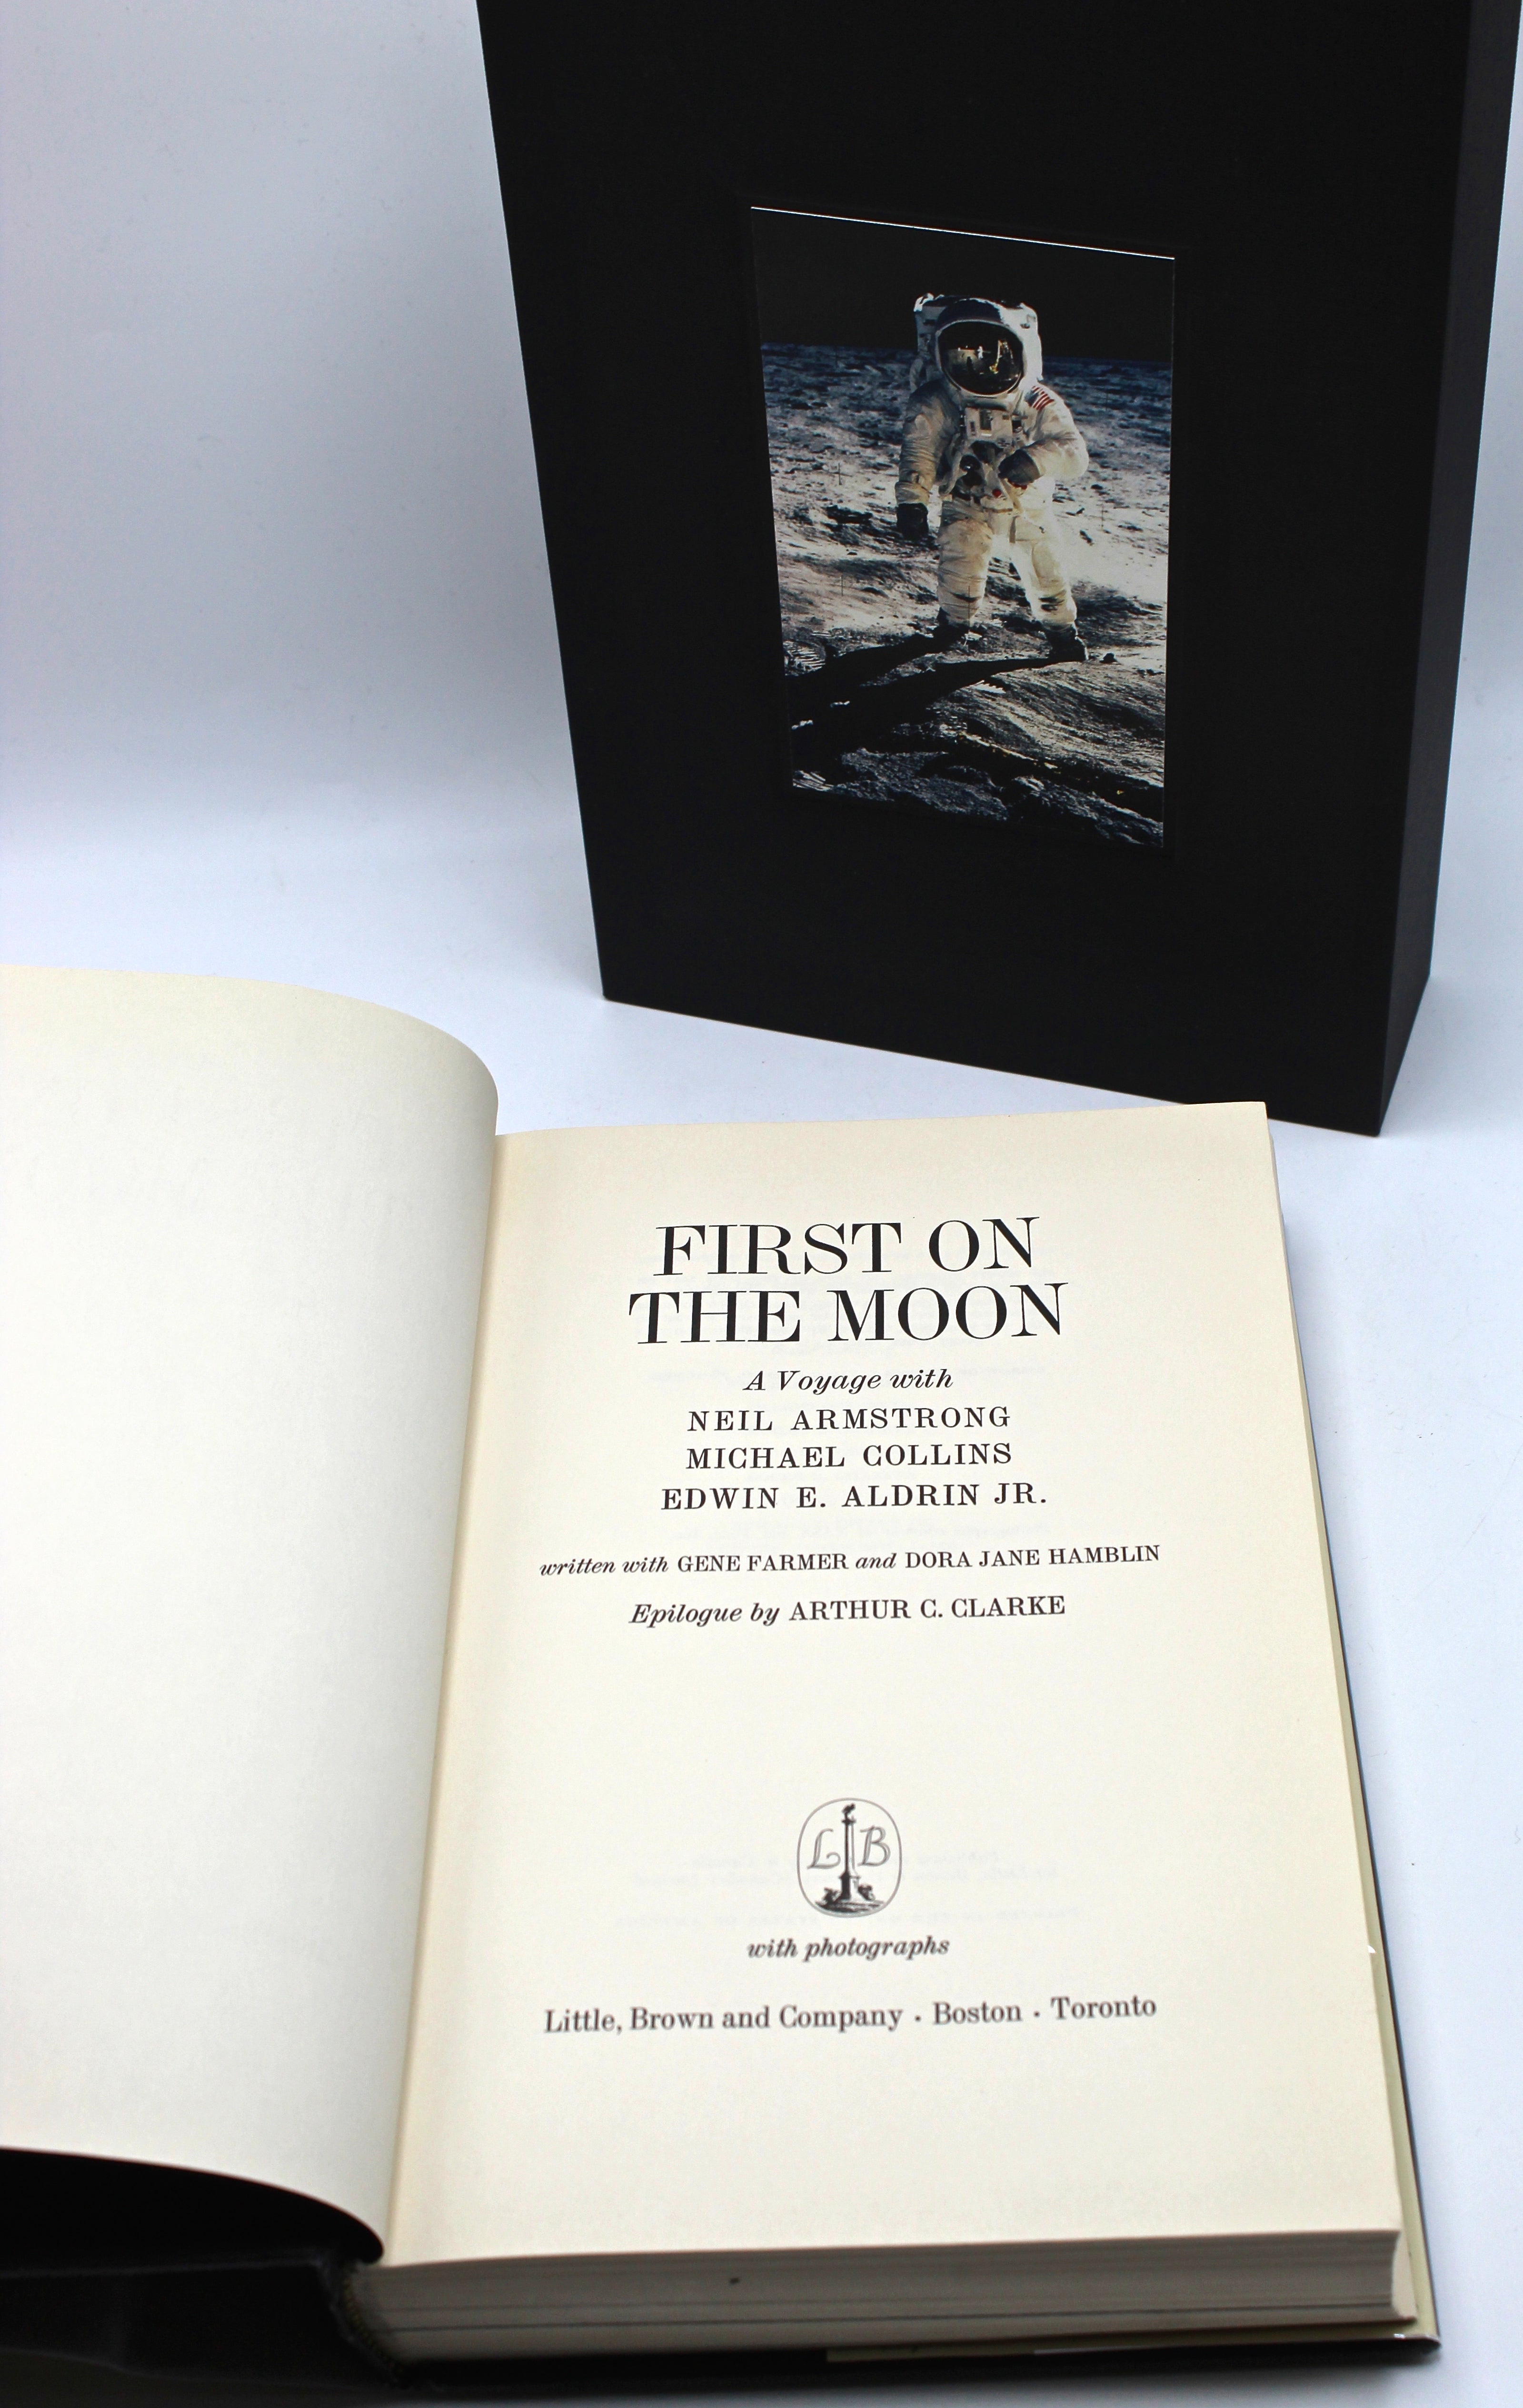 First on the Moon: A Voyage with Neil Armstrong, Michael Collins, and Edwin E. Aldrin, Jr., First Edition, 1970